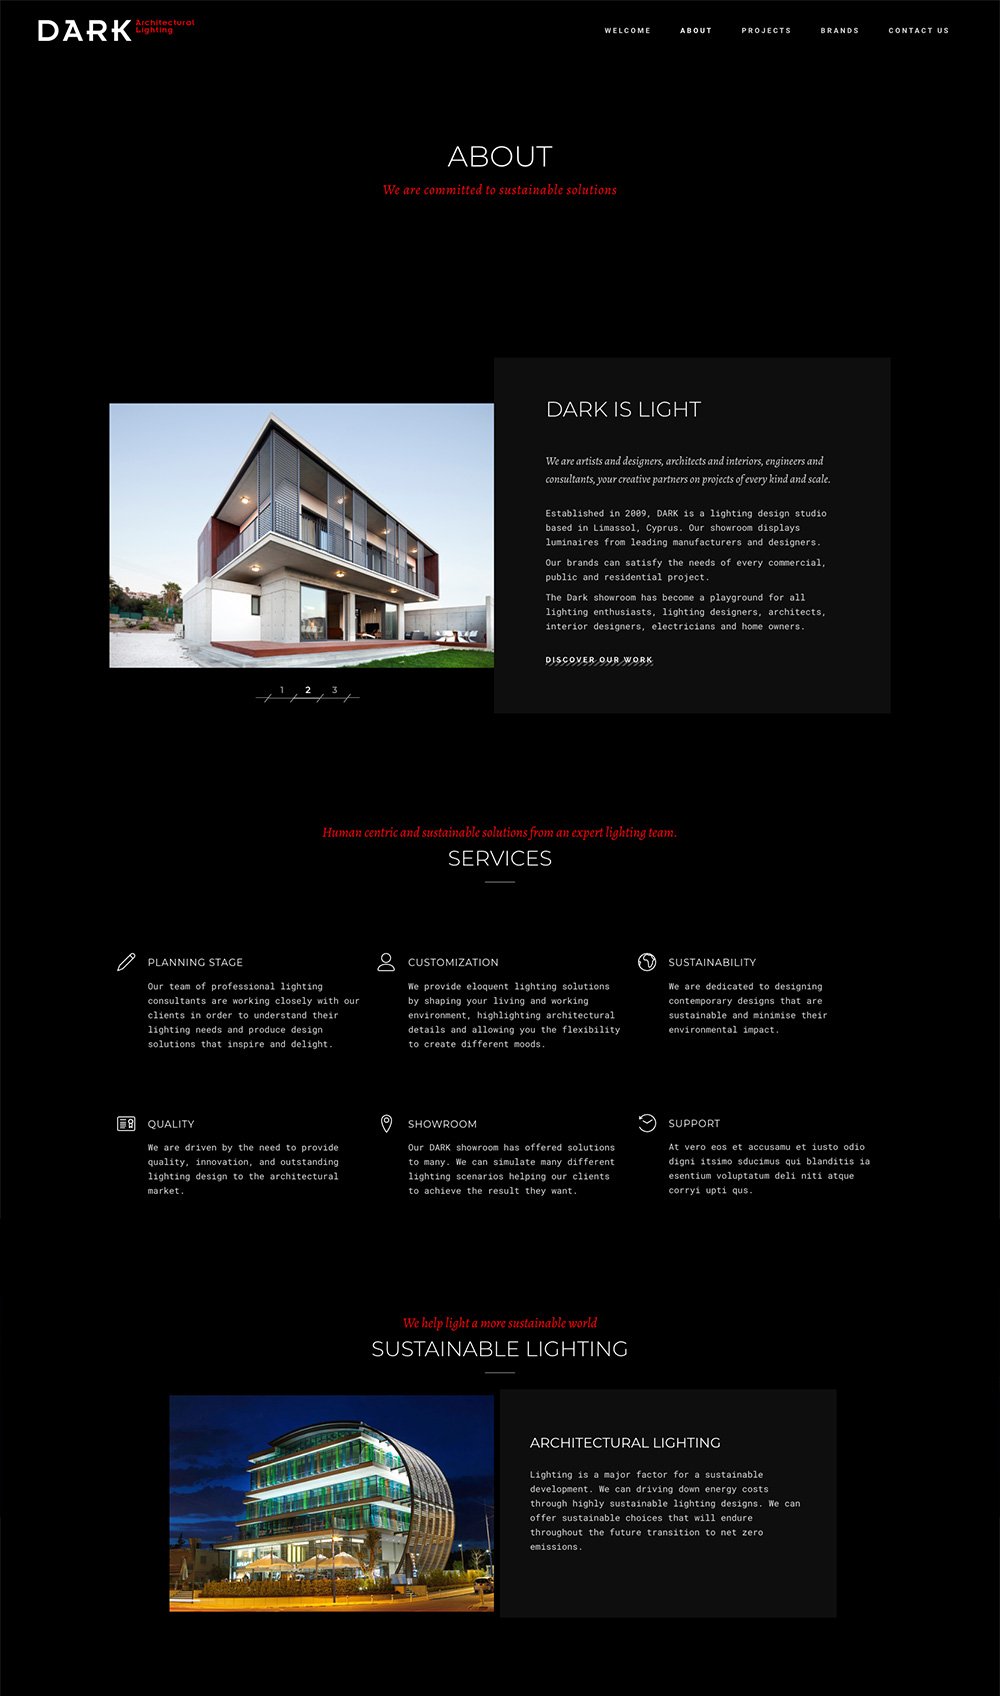 Dark Architectural Lighting / about page web design